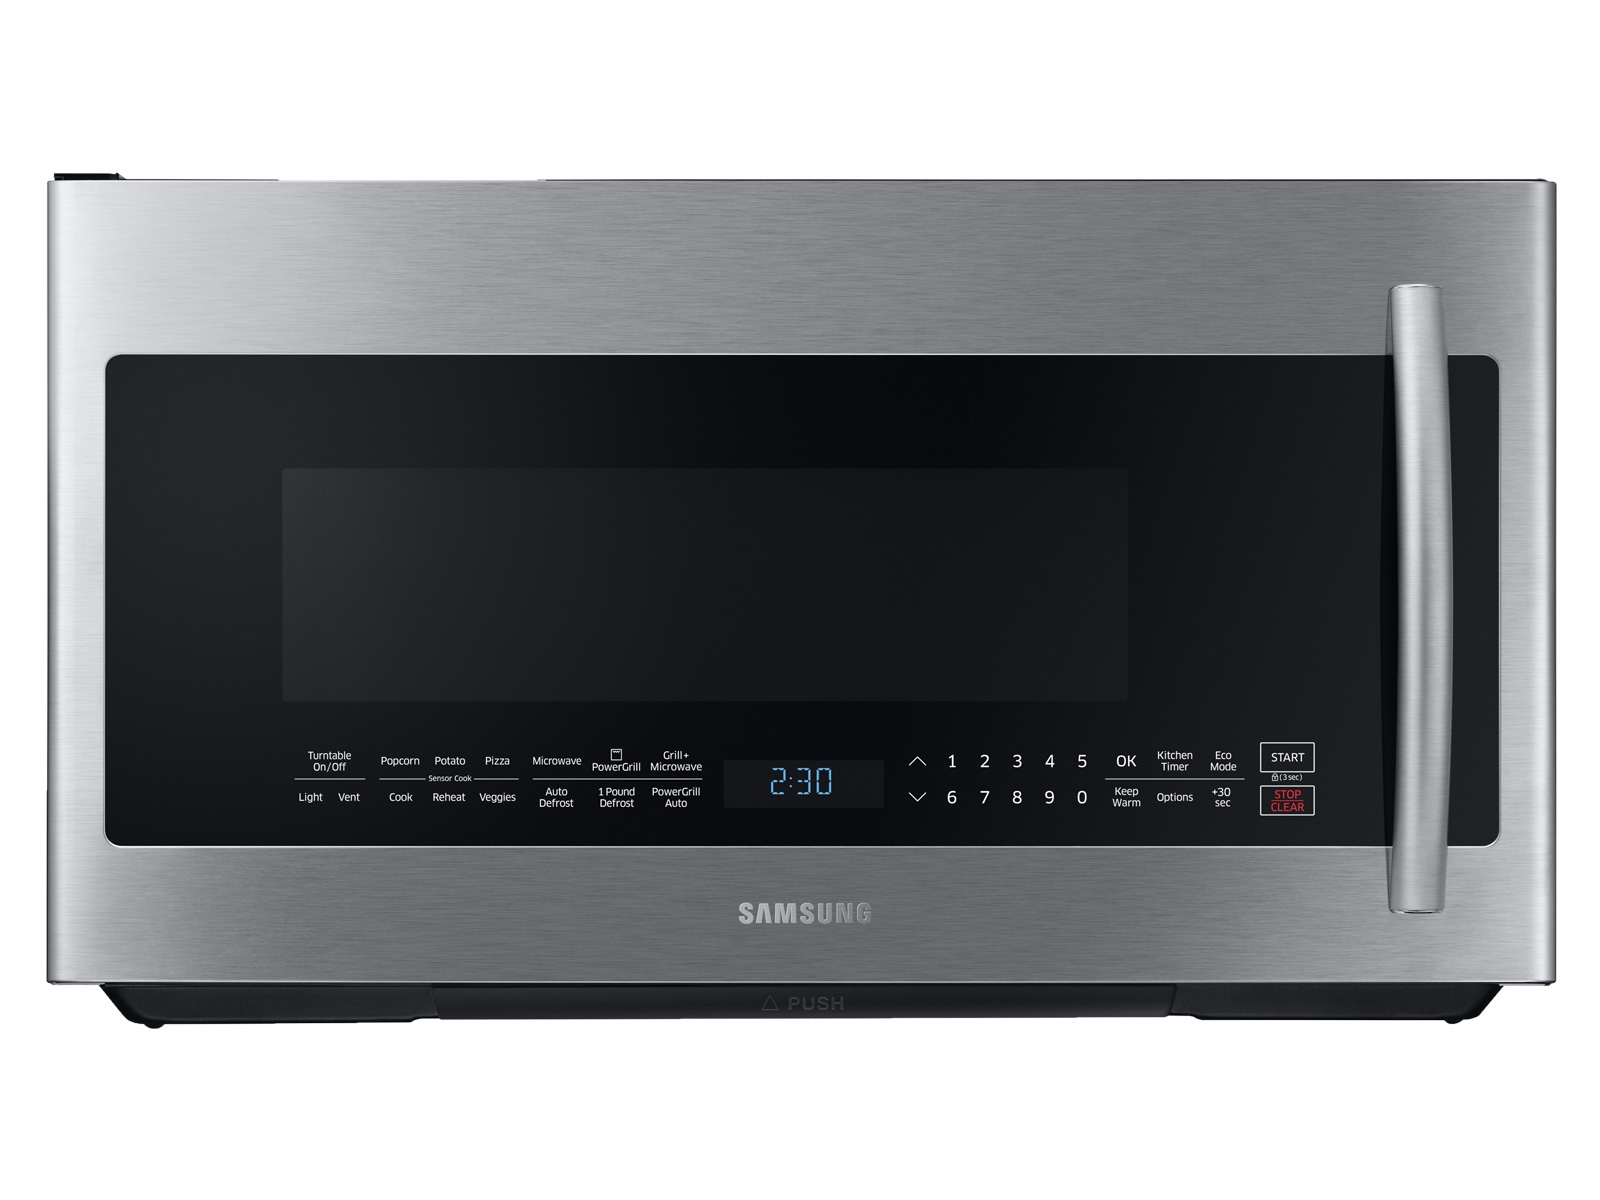 Samsung NQ70M6650DG 30 Microwave Combination Wall Oven with Steam Cook and  WiFi - Fingerprint Resistant Black Stainless Steel - Fanning's Appliances